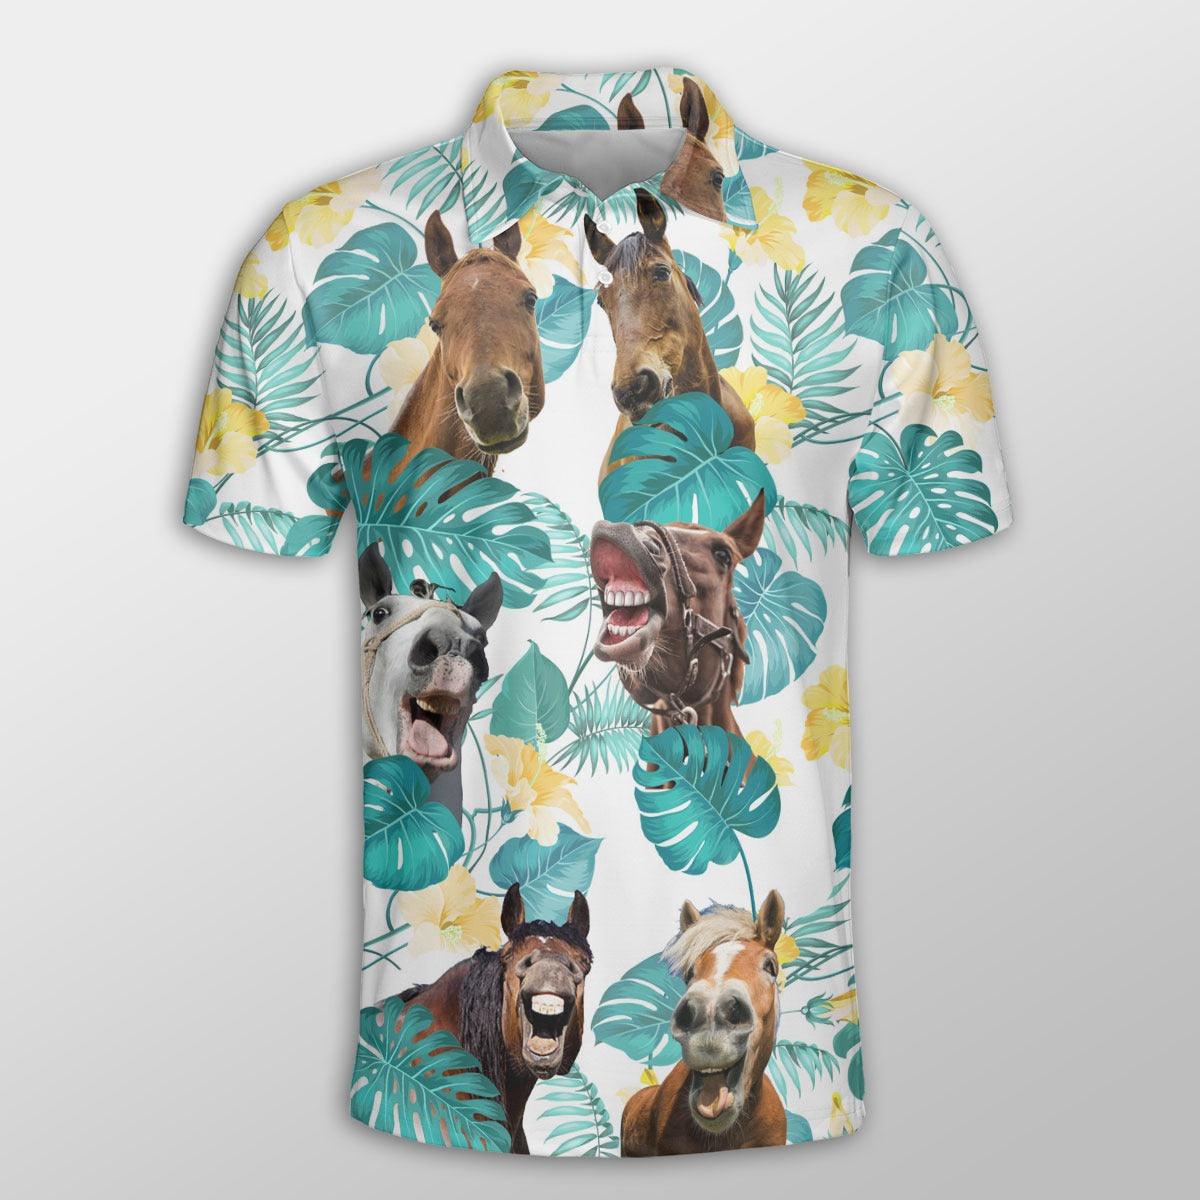 Horse Men Polo Shirts For Summer - Horse In Tropical Leaves Pattern Button Shirts For Men - Perfect Gift For Horse Lovers, Summer Lovers - Amzanimalsgift